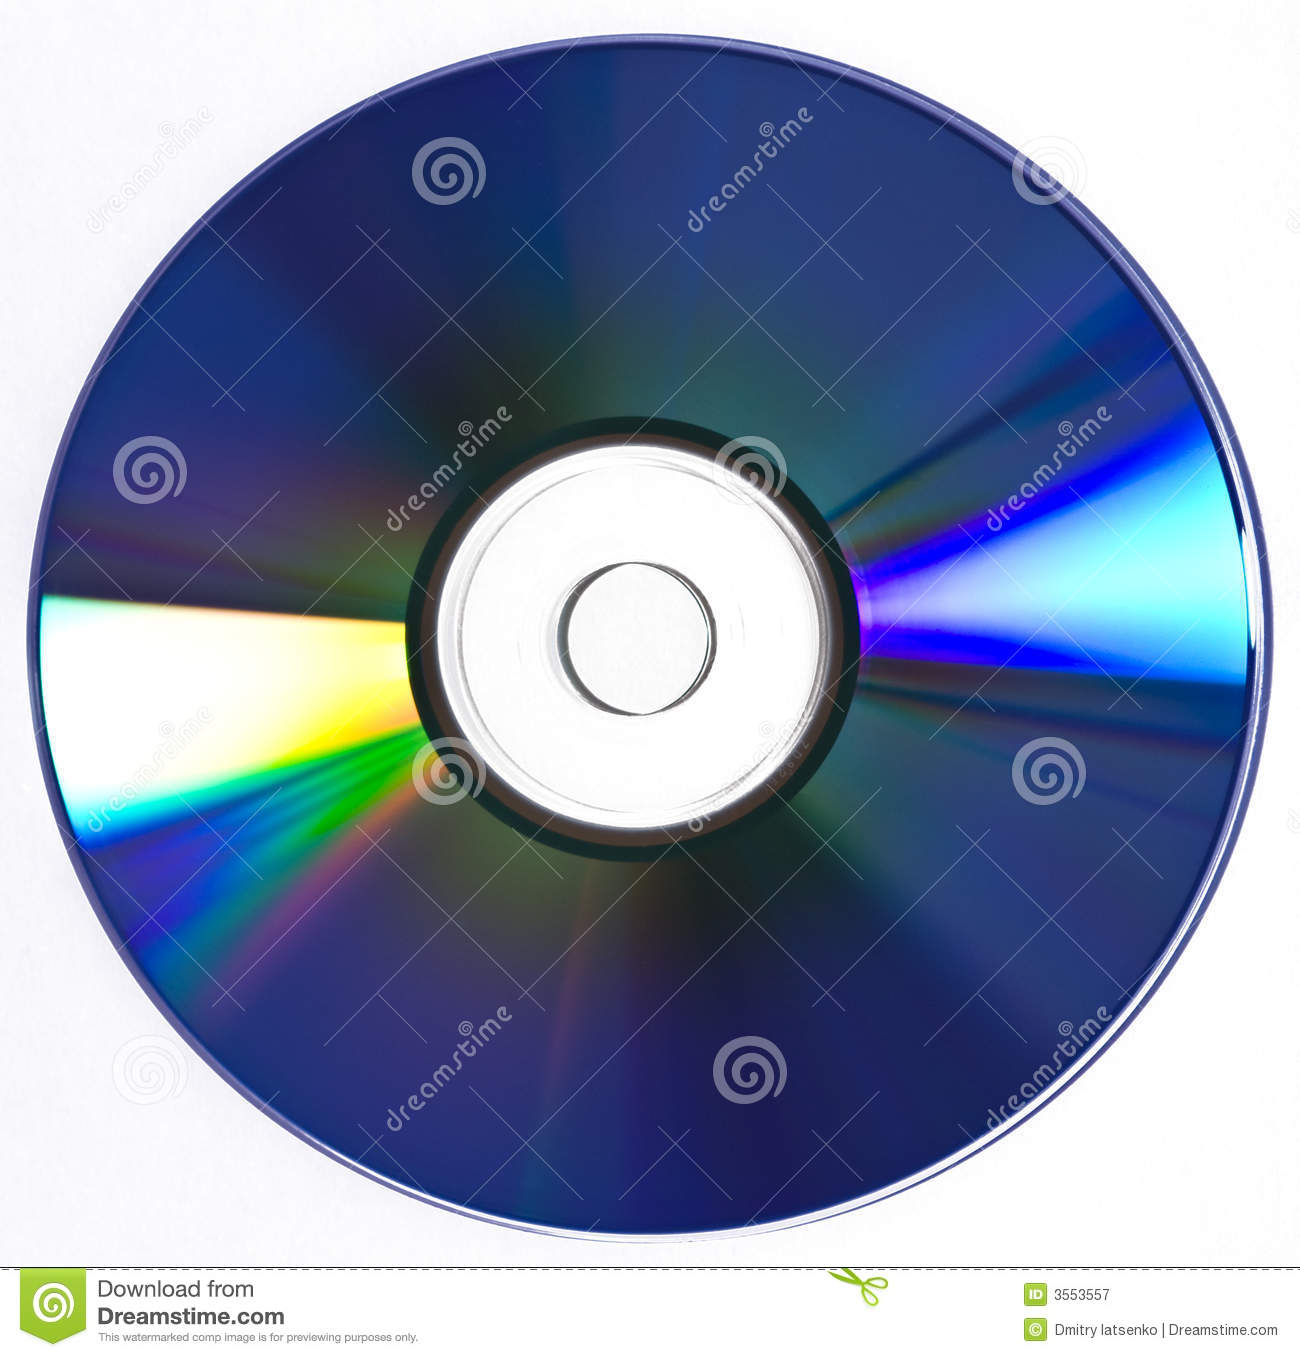 Cd Dvd Blu Ray Disk Royalty Free Stock Photography   Image  3553557